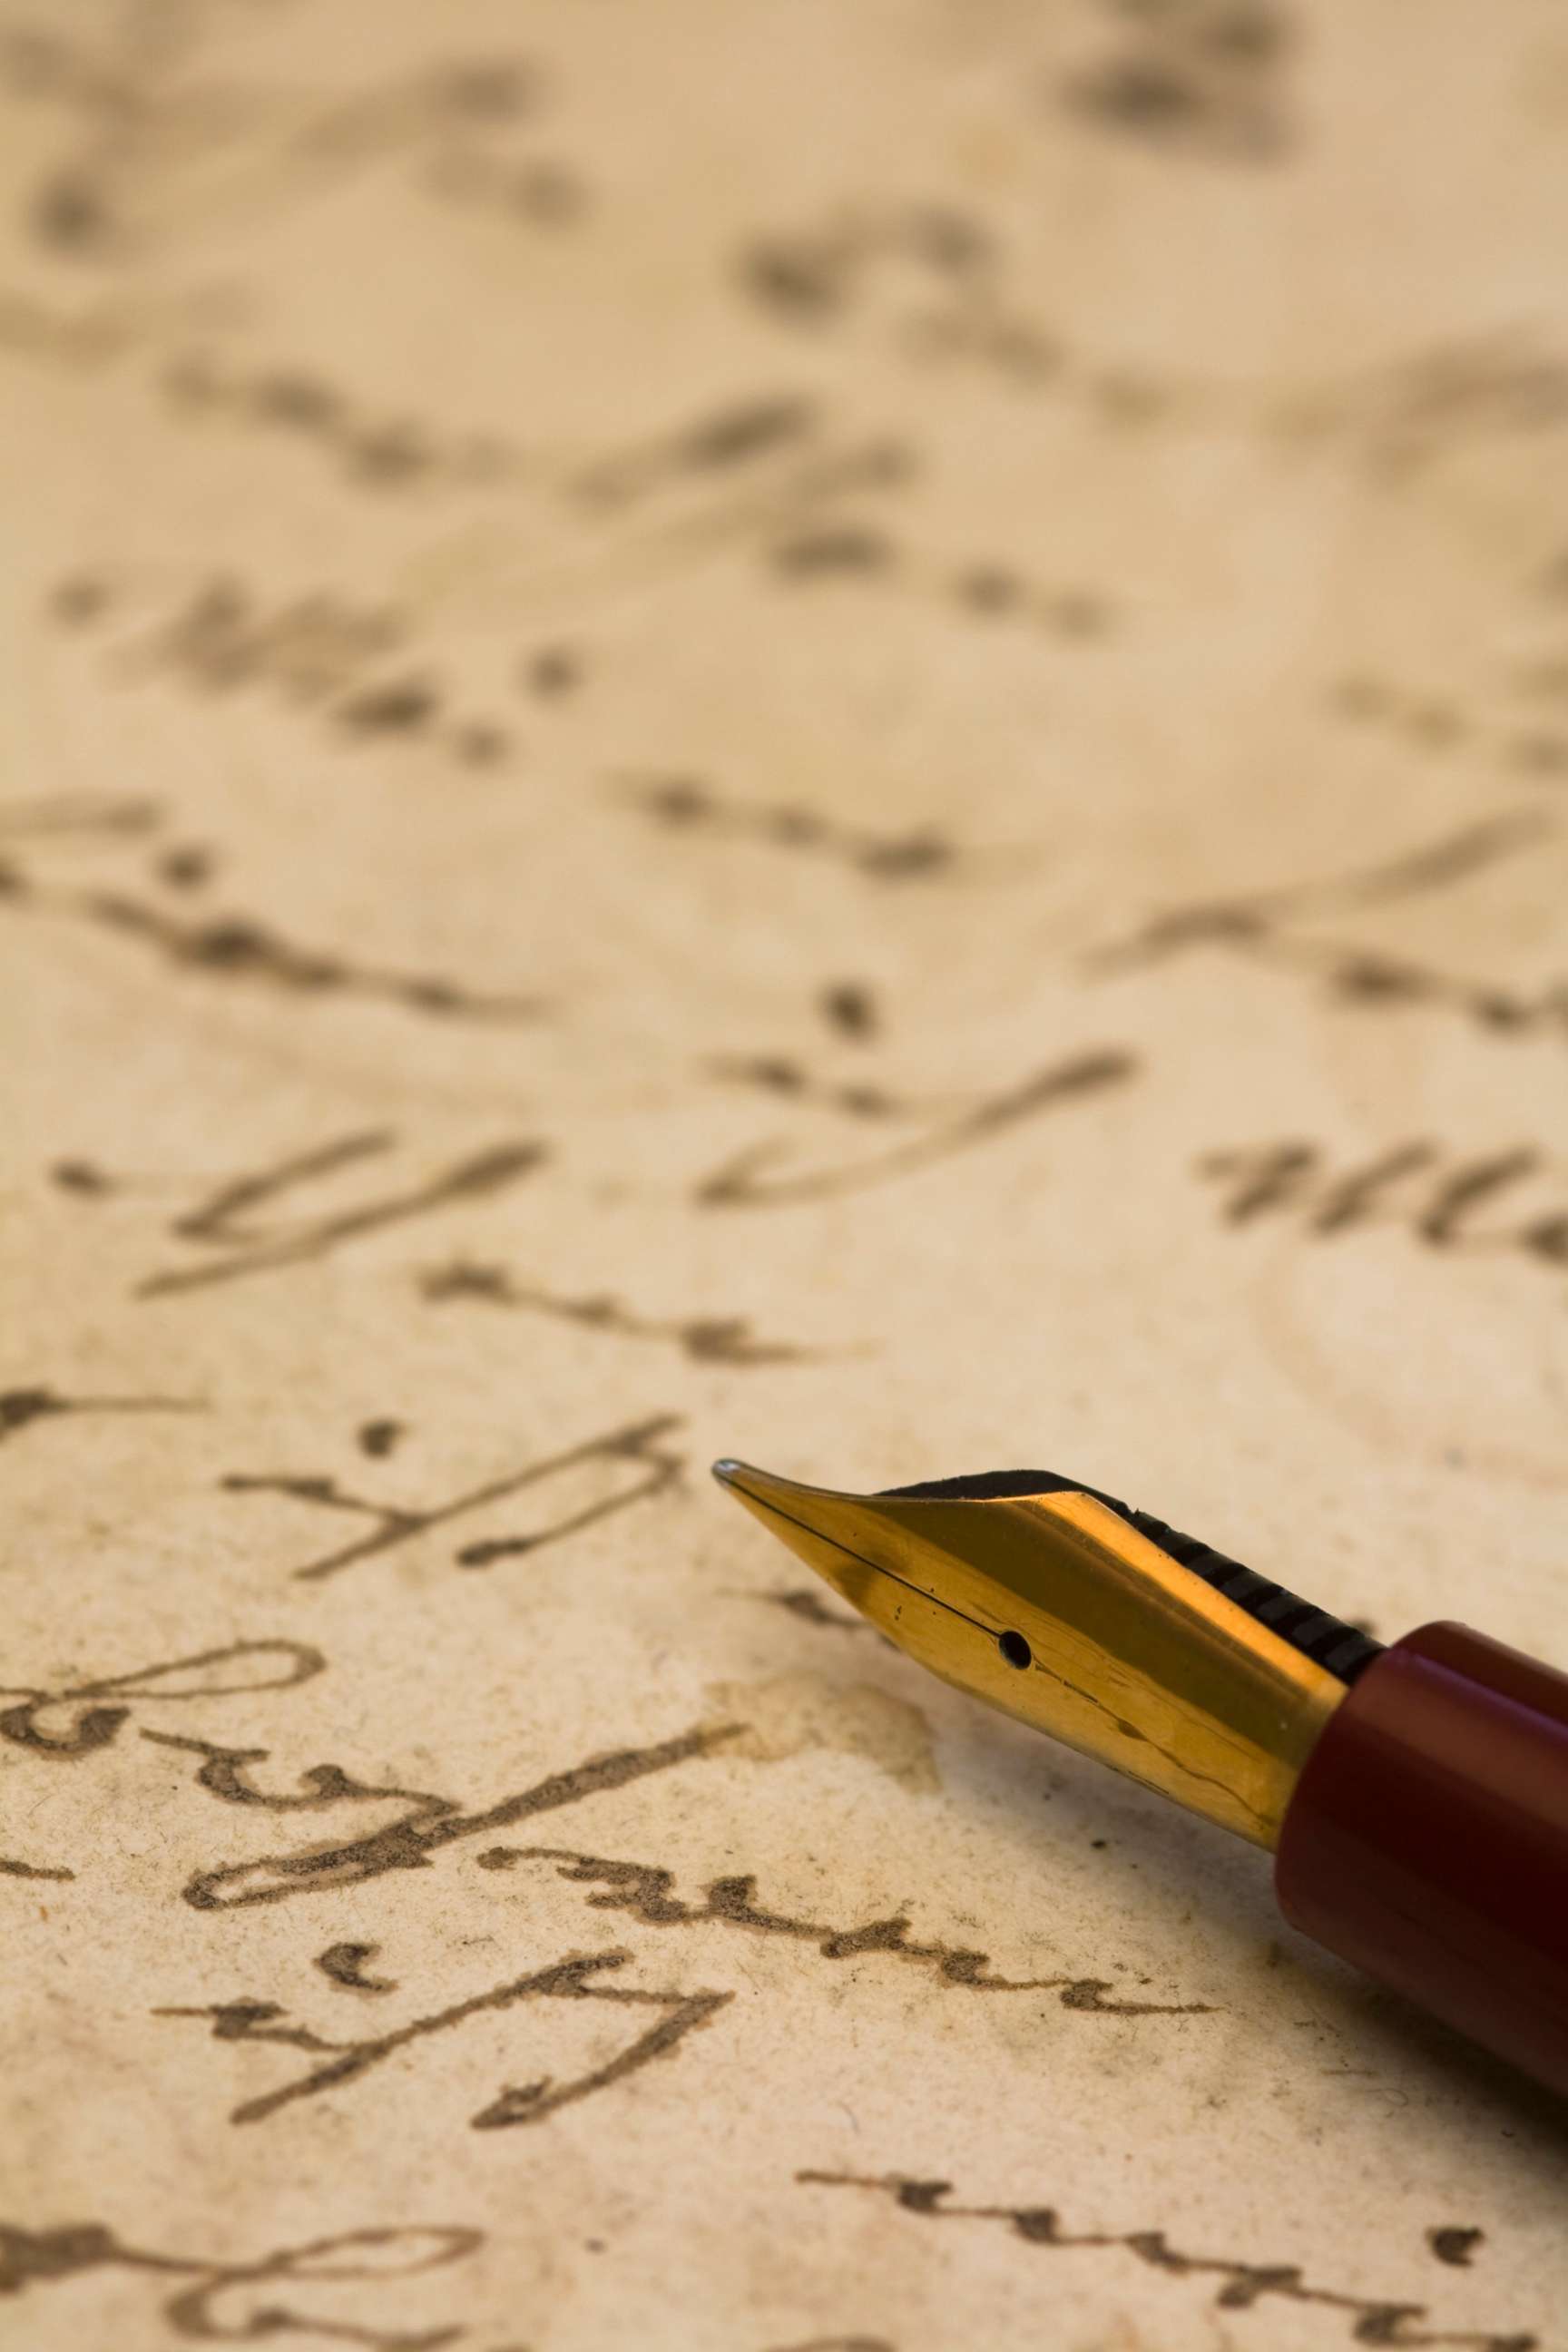 PHOTO: Stock photo of a fountain pen and an old hand written letter.